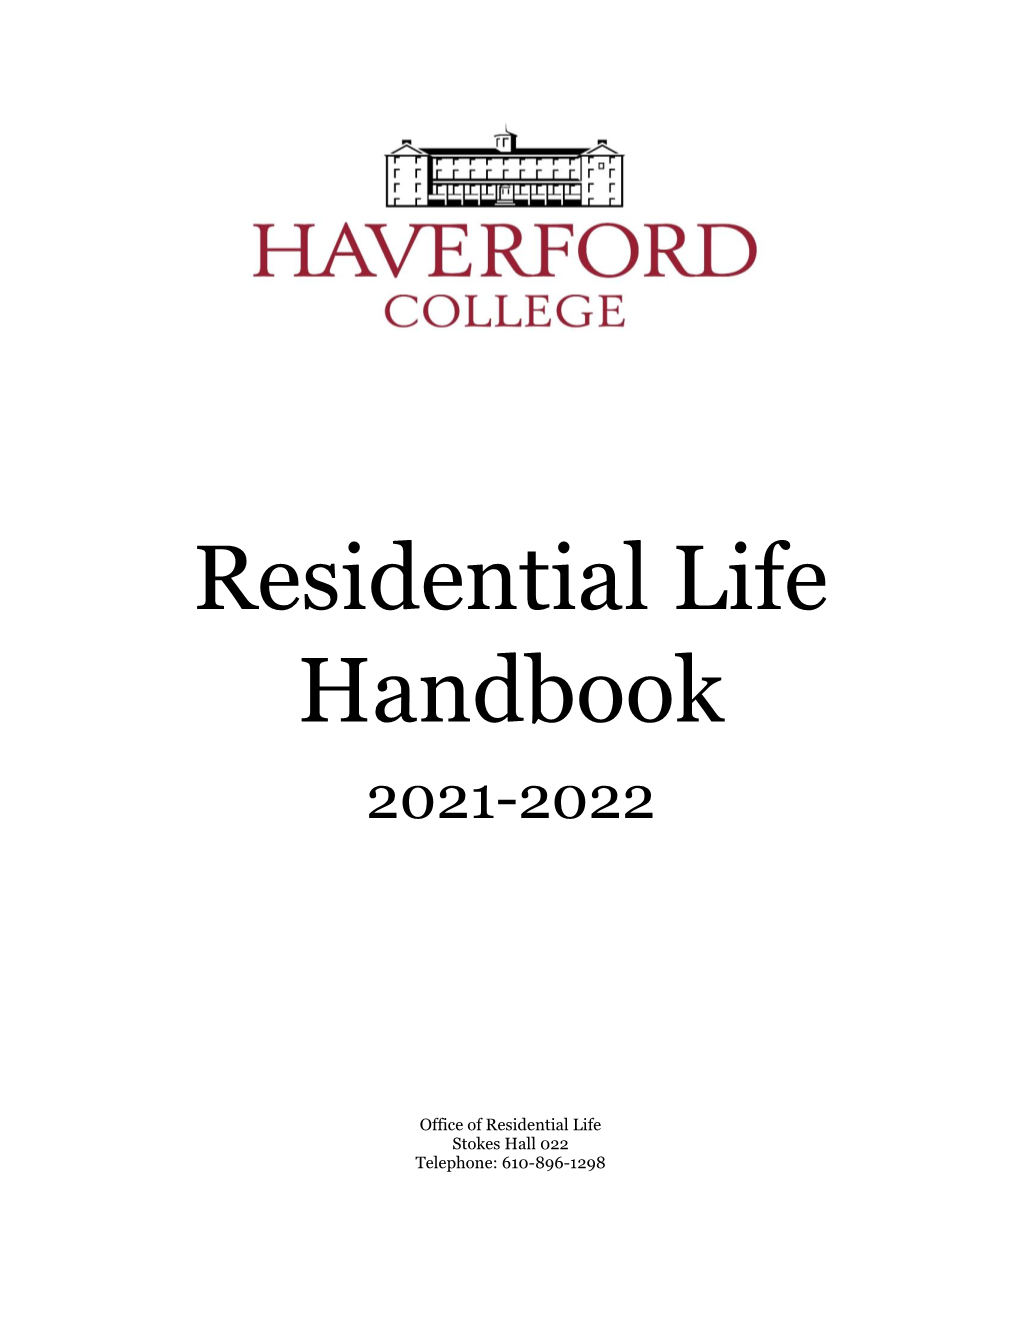 The Office of Residential Life Handbook